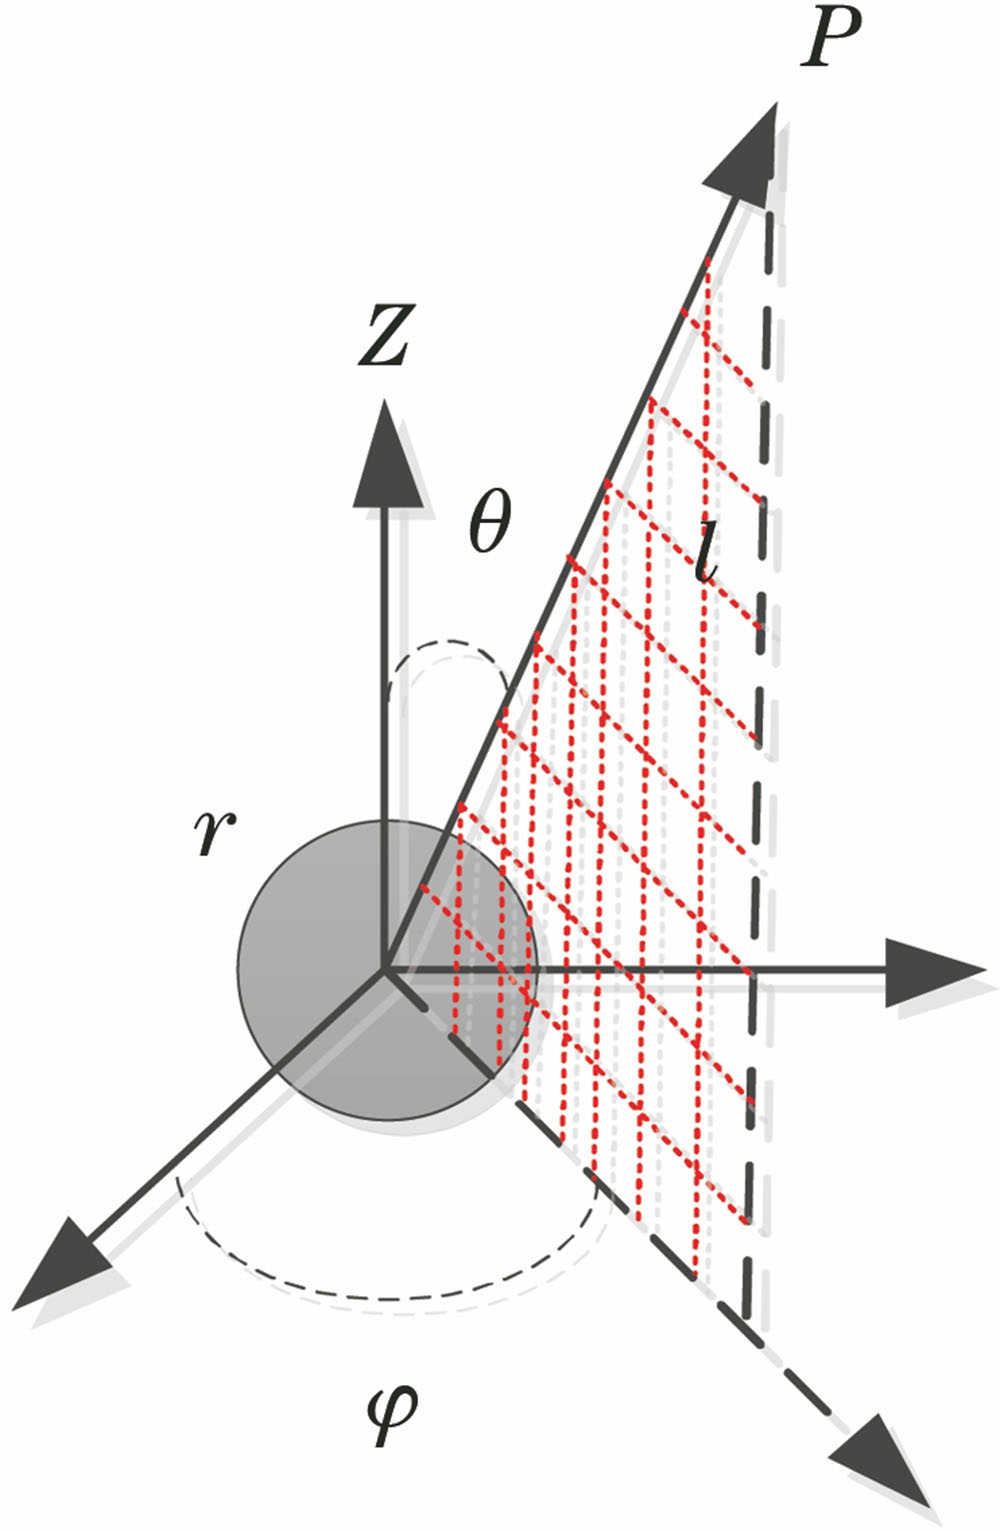 Coordinate system of Mie scattering